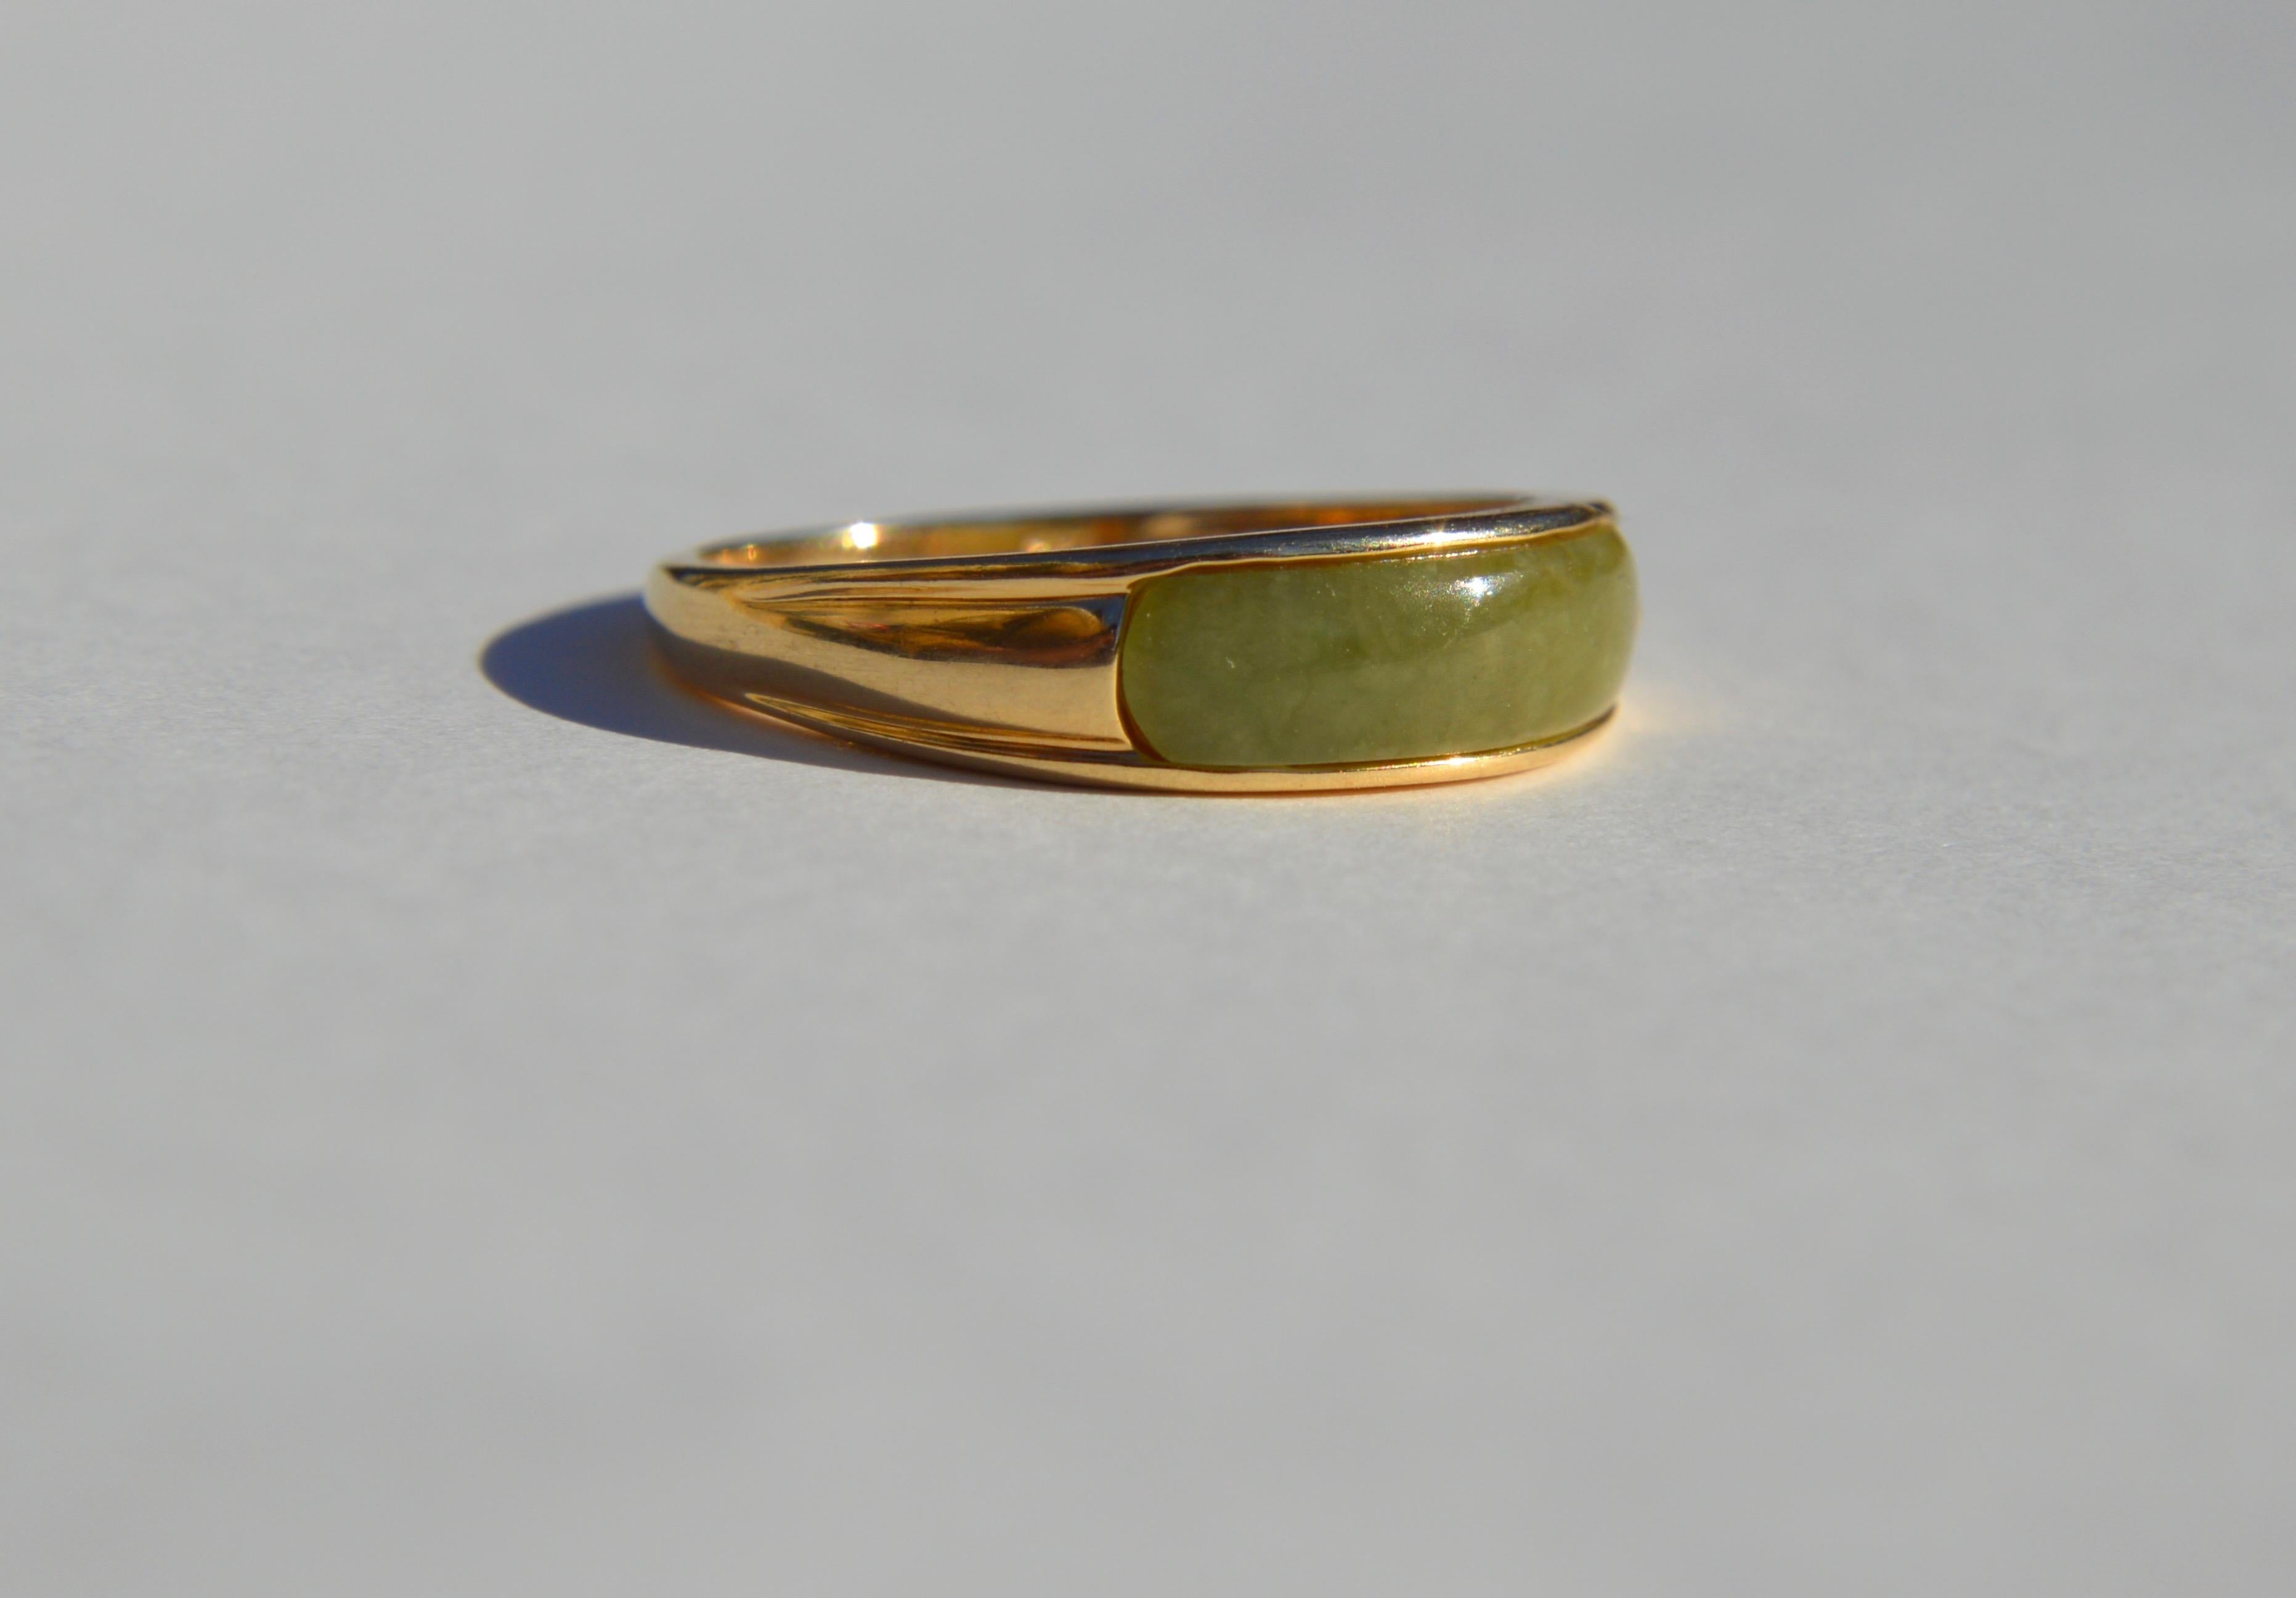 Beautiful vintage circa 1950s nephrite jade 14K yellow gold east west signet ring. In good condition, no scratches to the jade stone. Size 8. Stone measures 16x5mm. Marked as 14K.

All items arrive in a black with gold foil logo presentation box